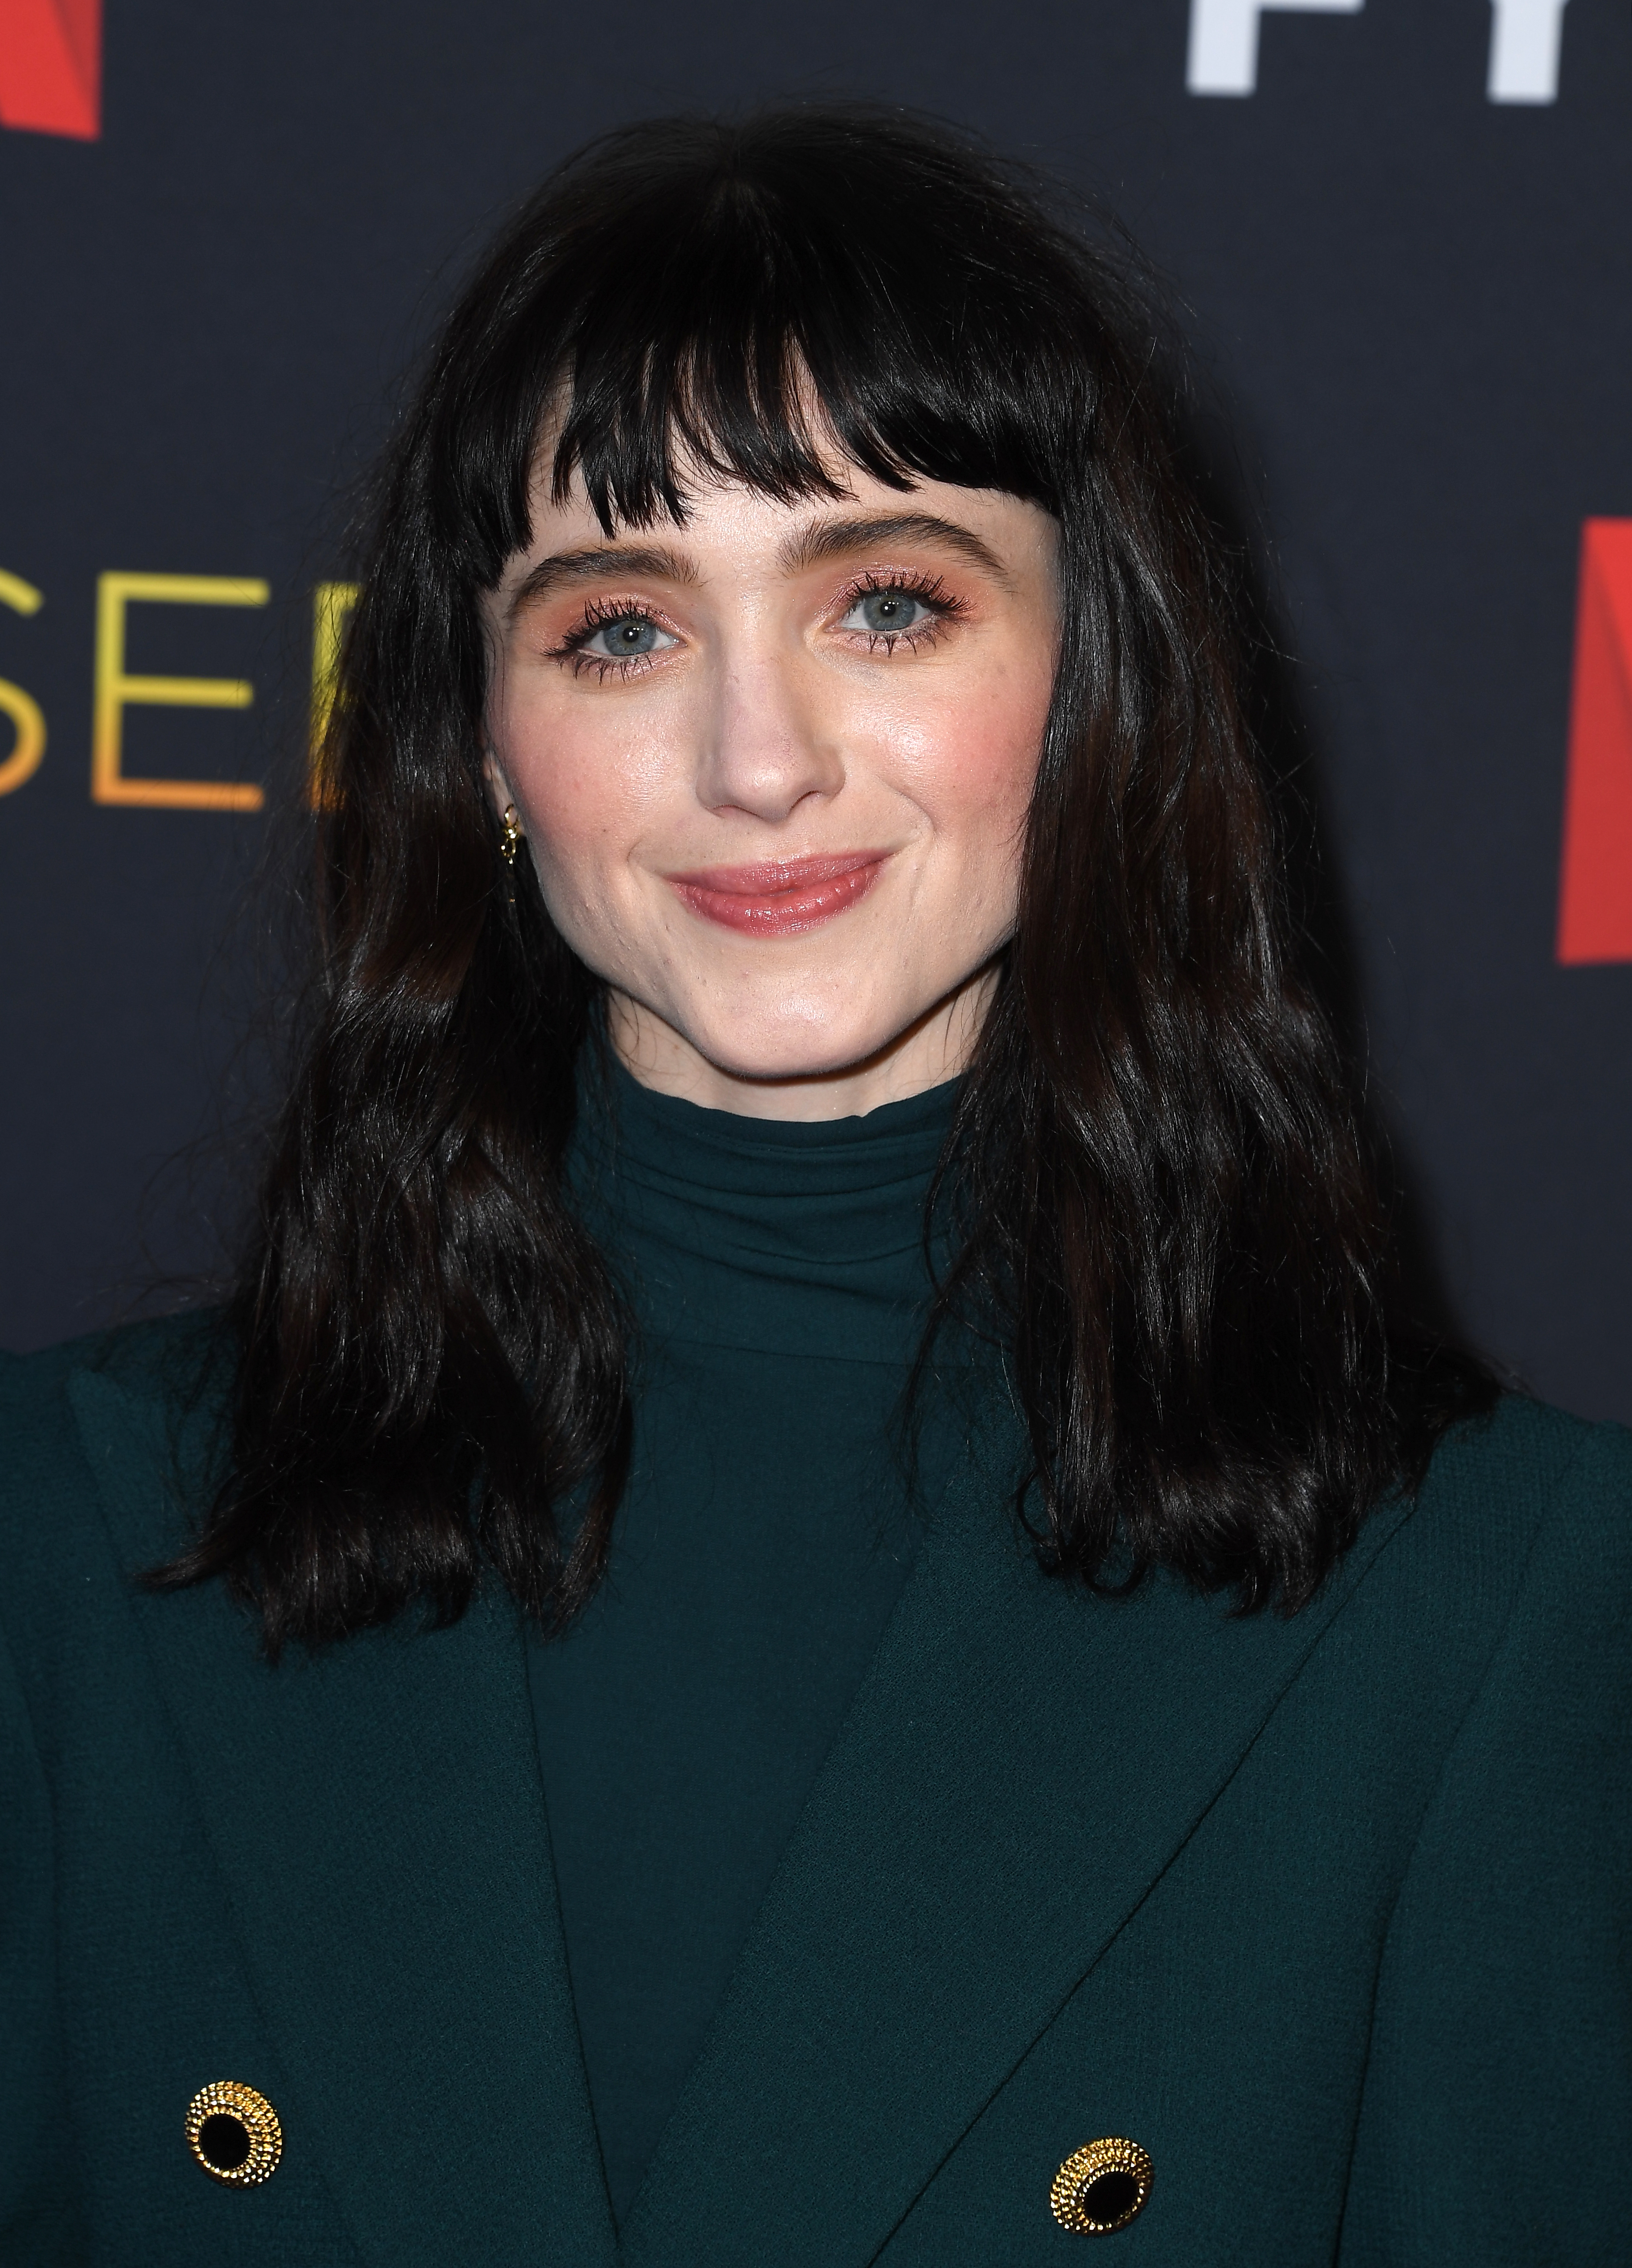 Natalia Dyer at the "Netflix Hosts 'Stranger Things' Los Angeles FYSEE Event" on May 27, 2022. in Beverly Hills, California. | Source: Getty Images